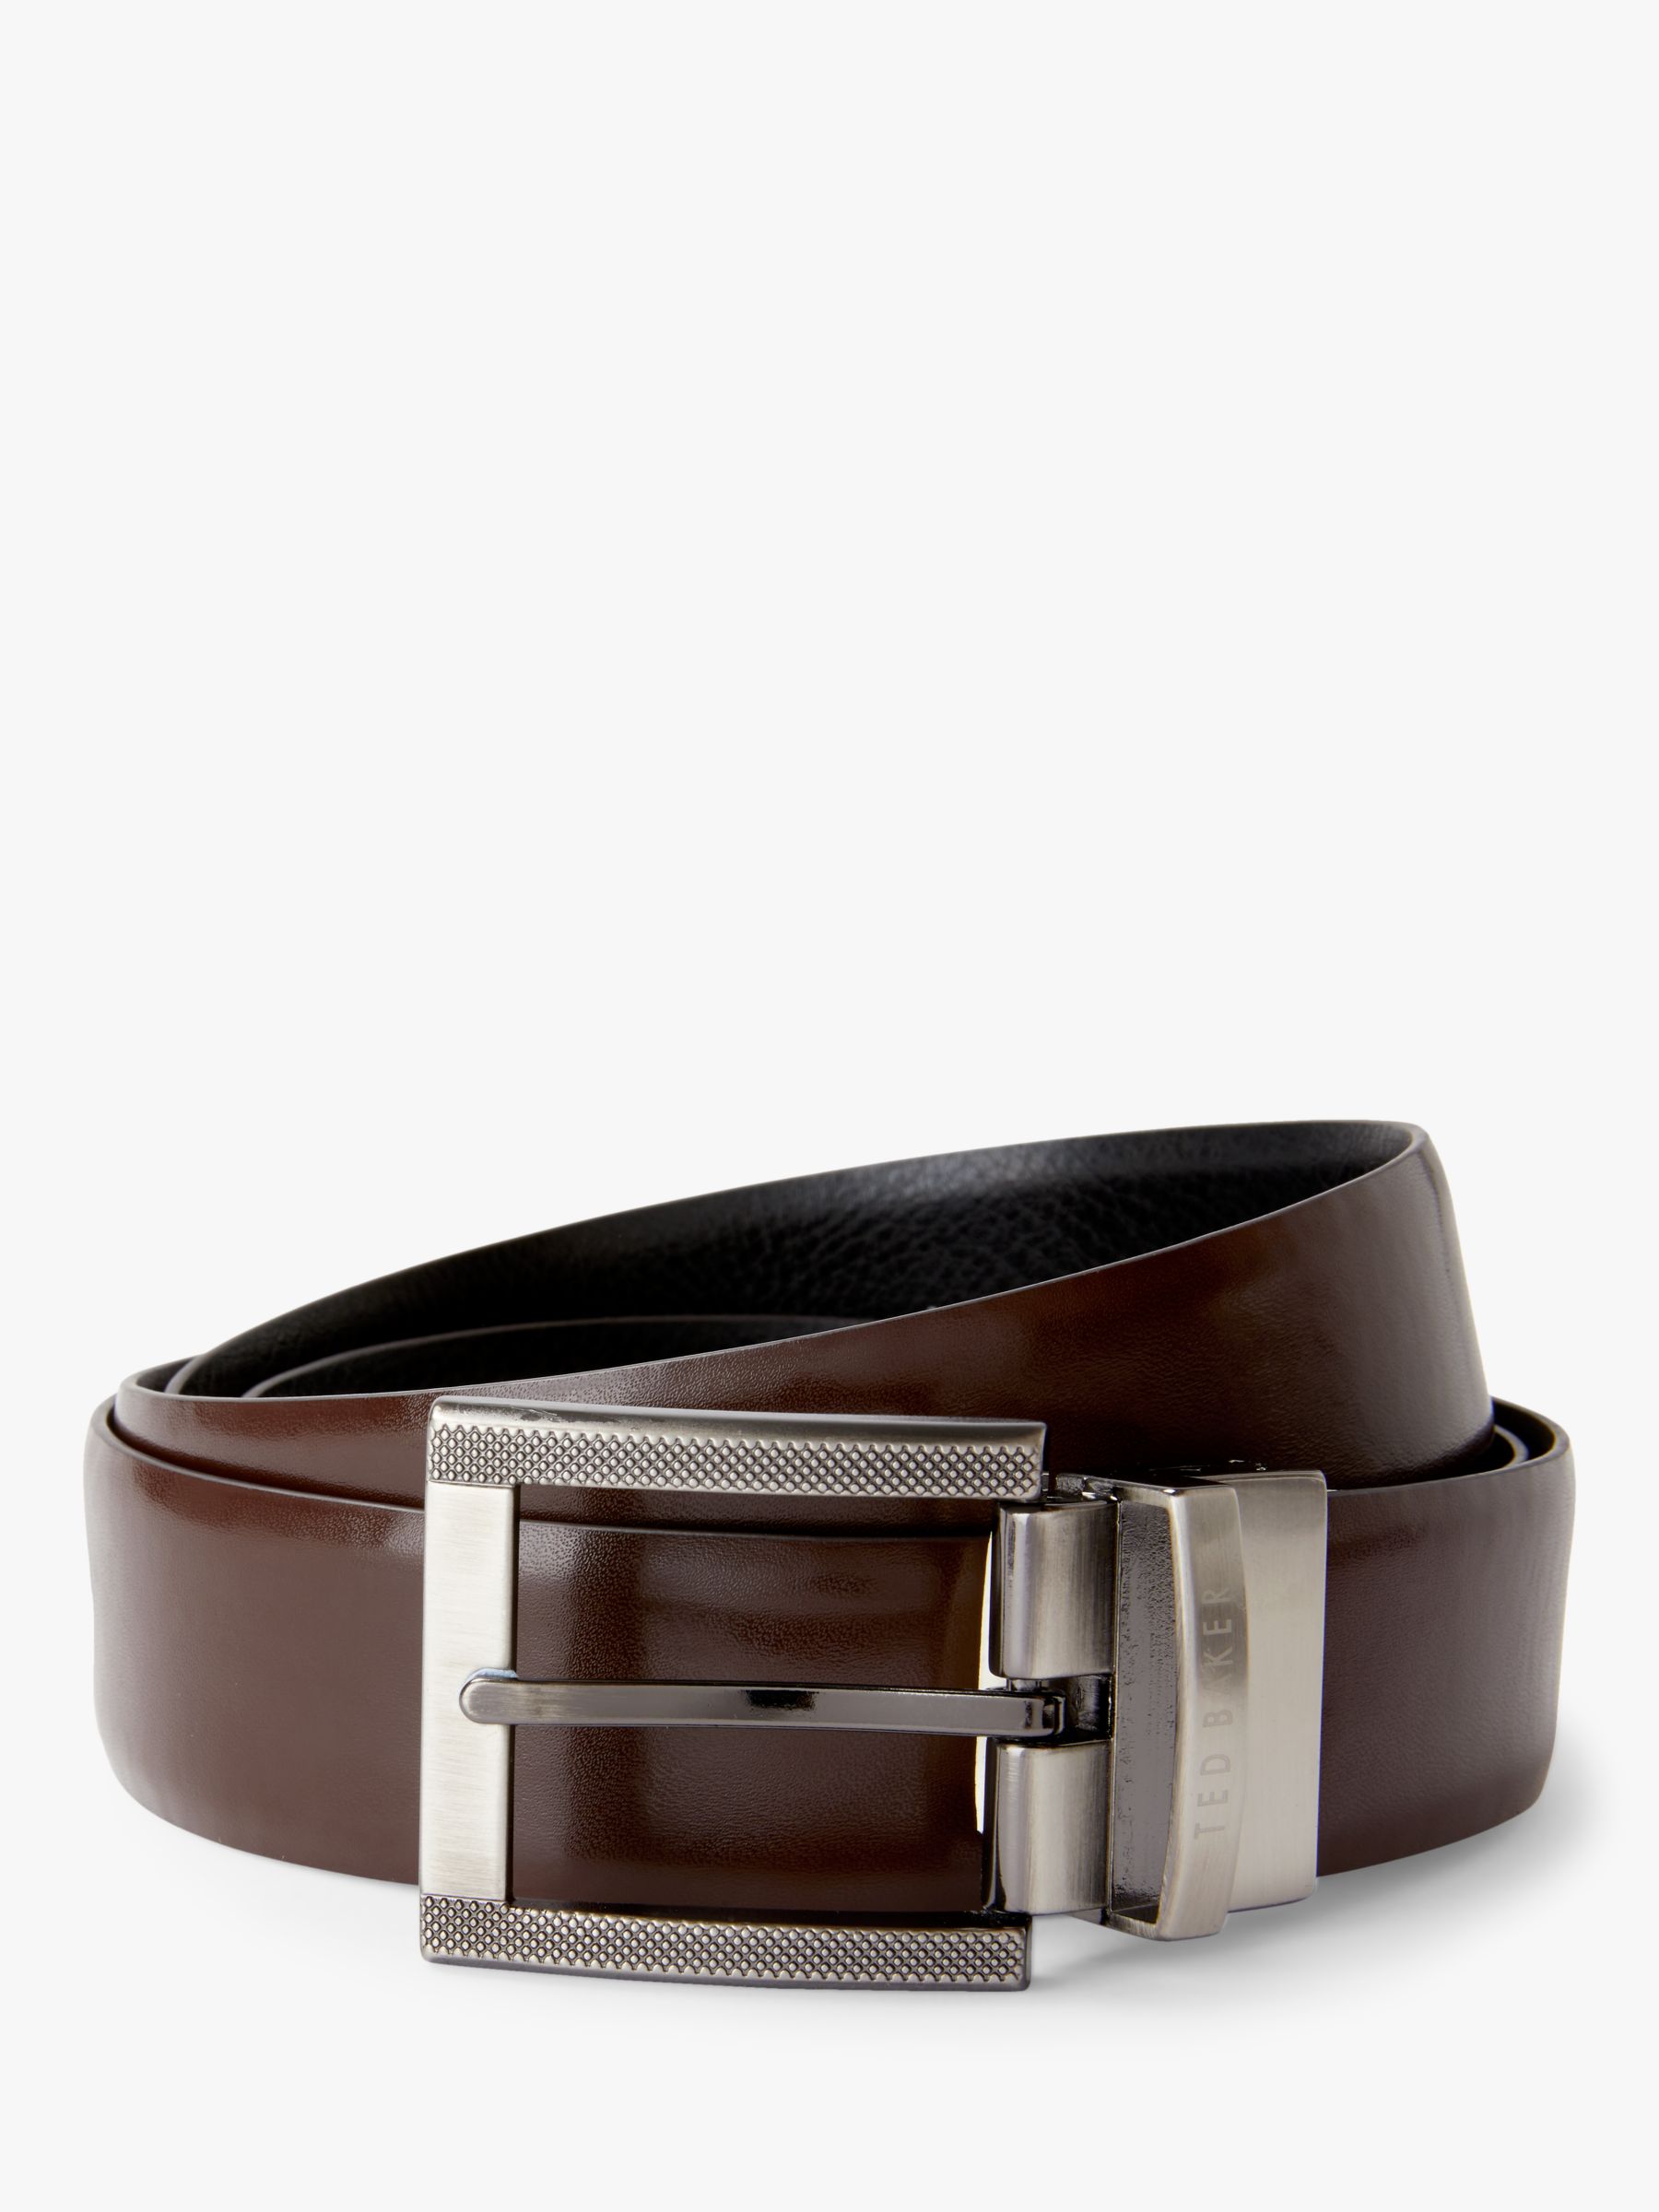 Ted Baker Burggs Two Buckle Belt Gift Set, One Size, Black